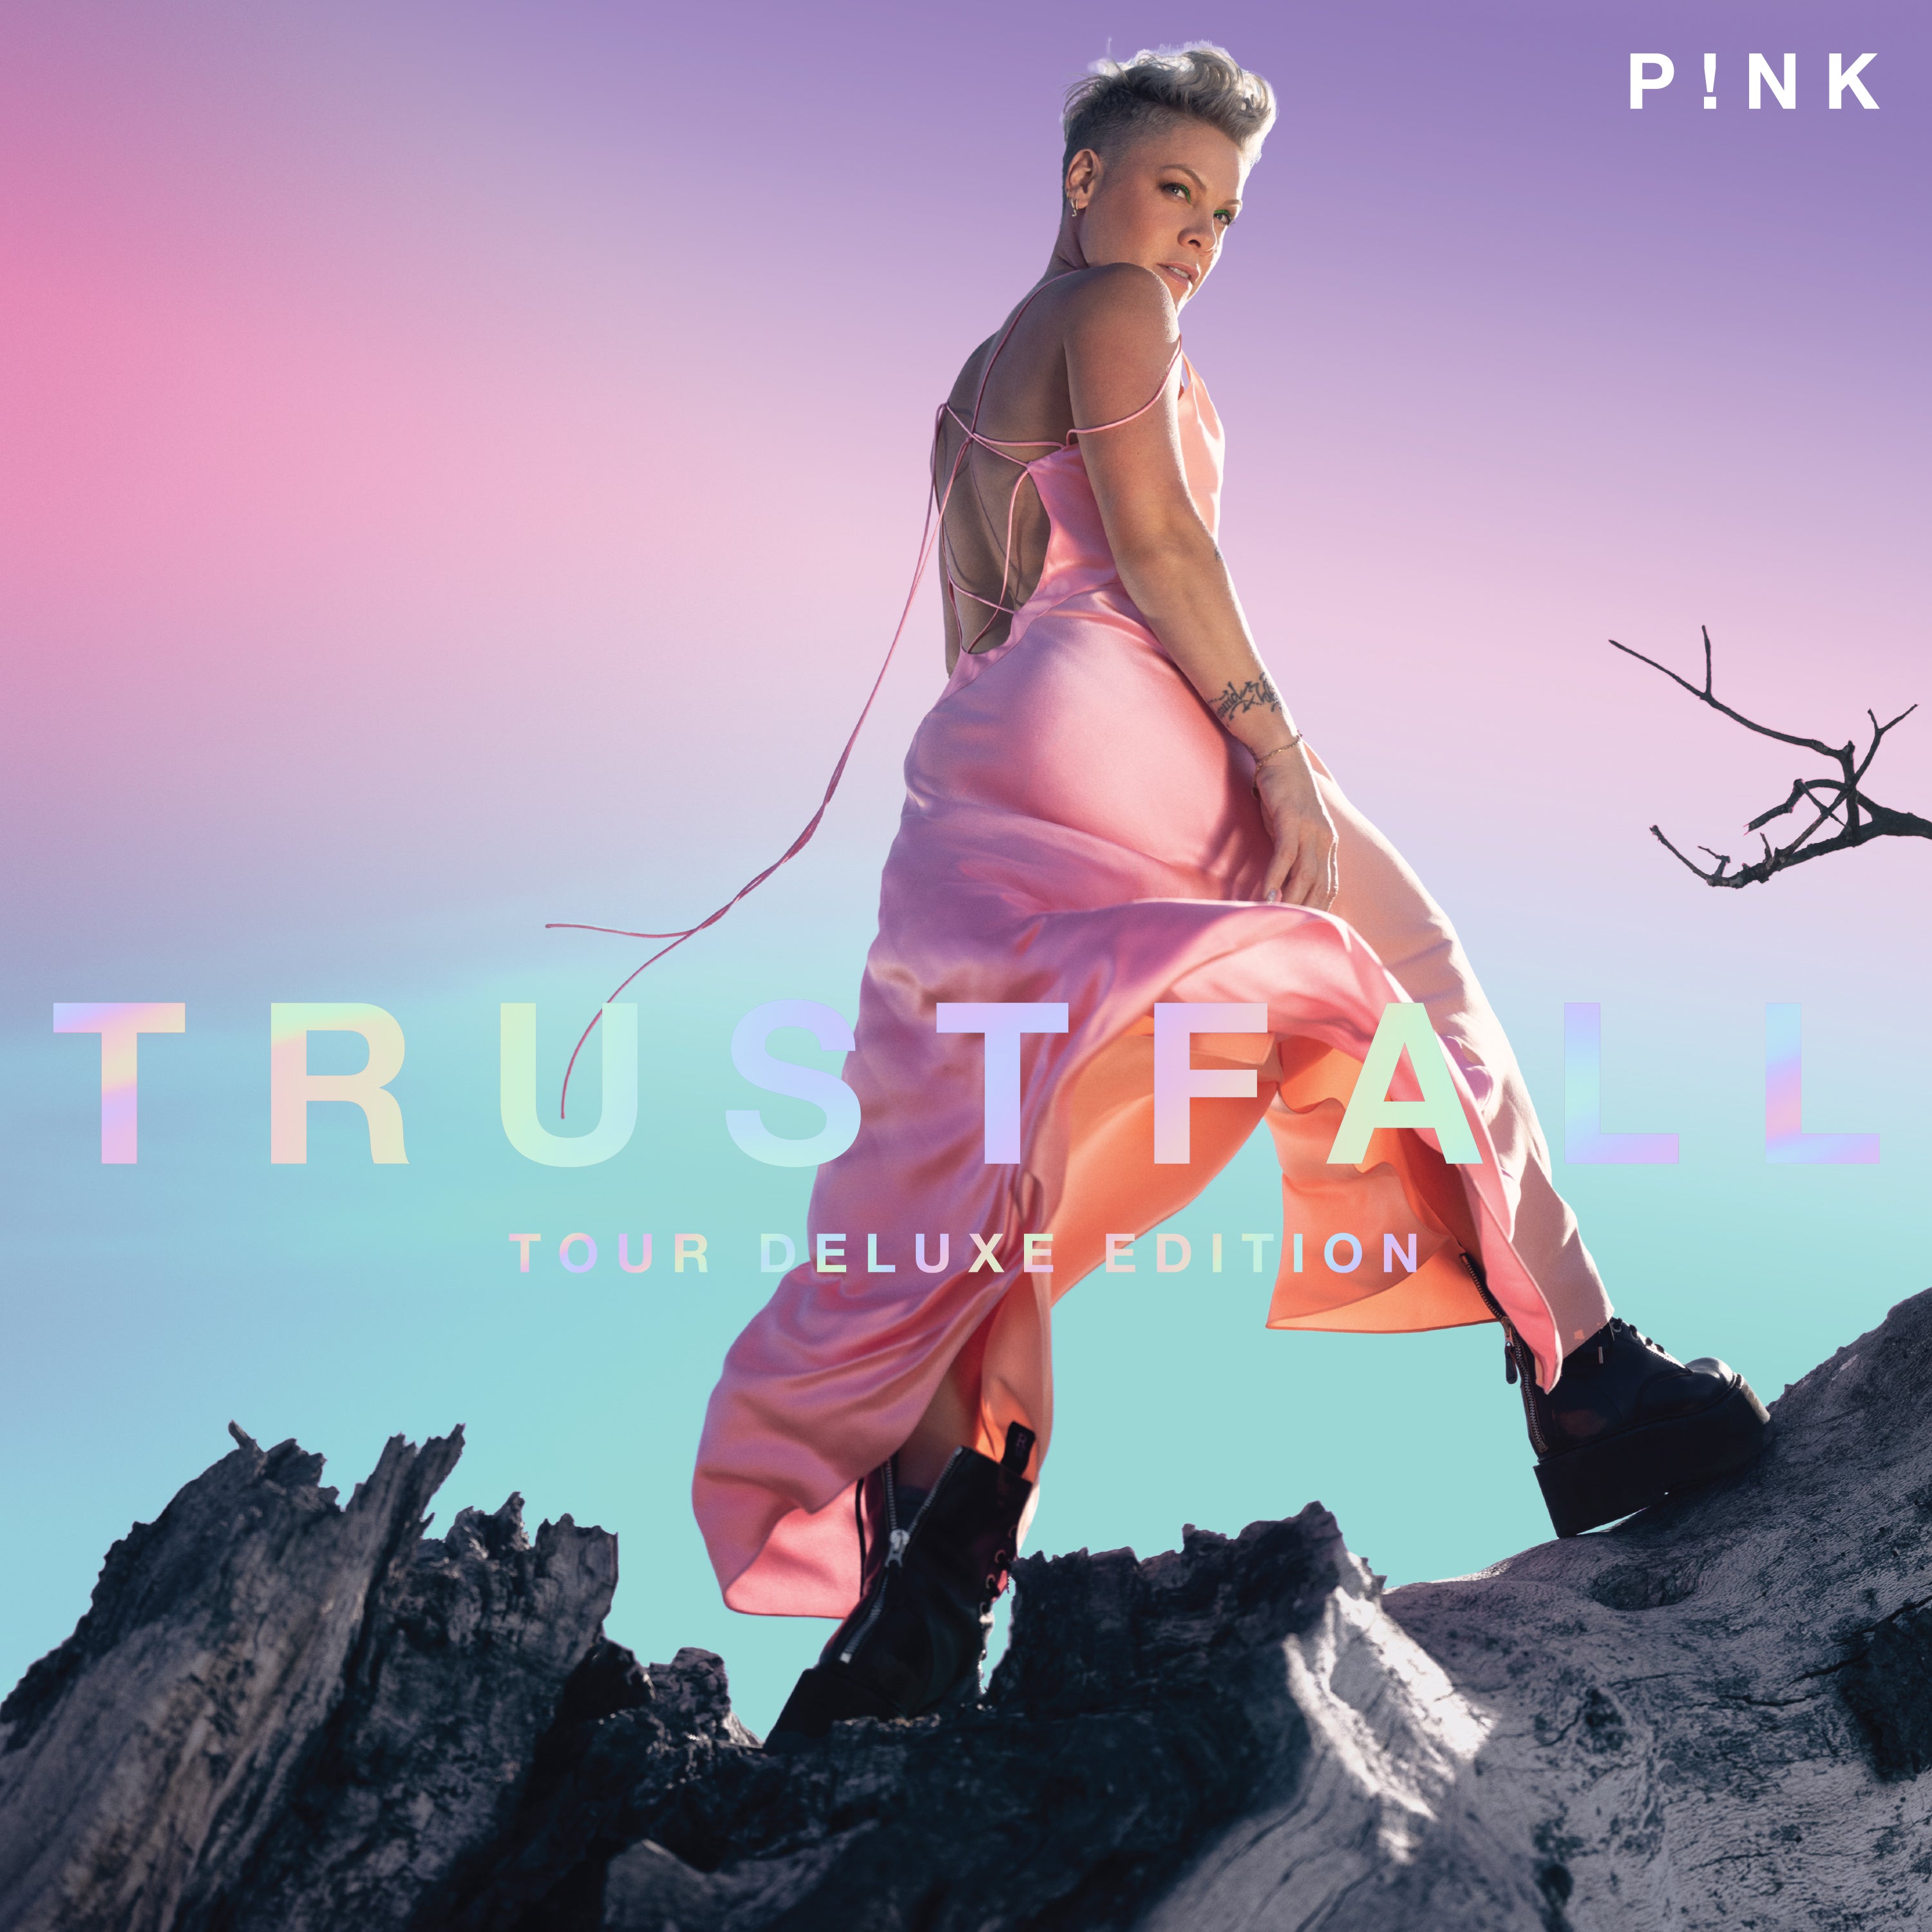 Pink - Trustfall - Tour Deluxe Edition: 2CD